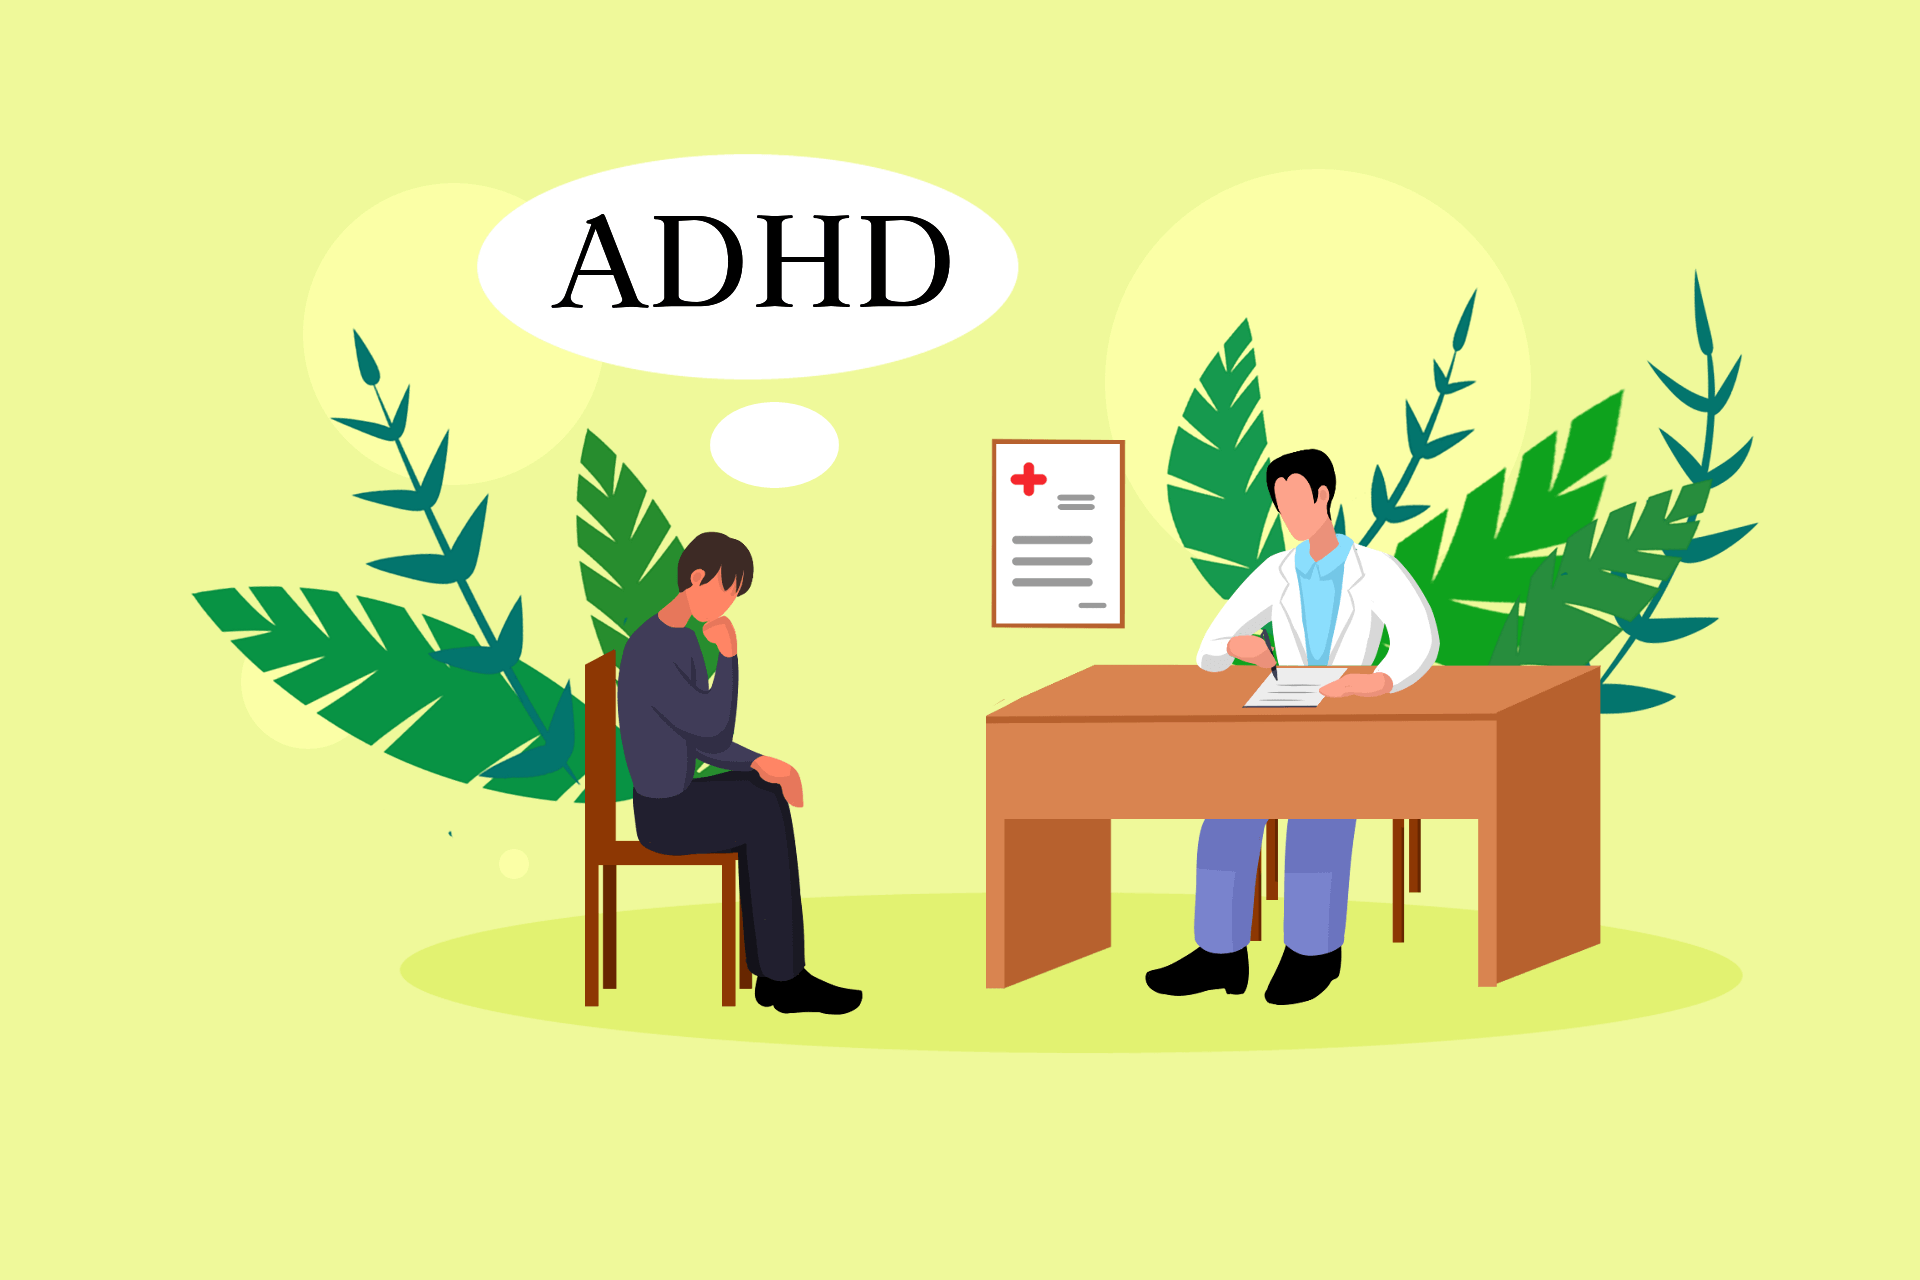 How to Talk to Your Doctor About ADHD